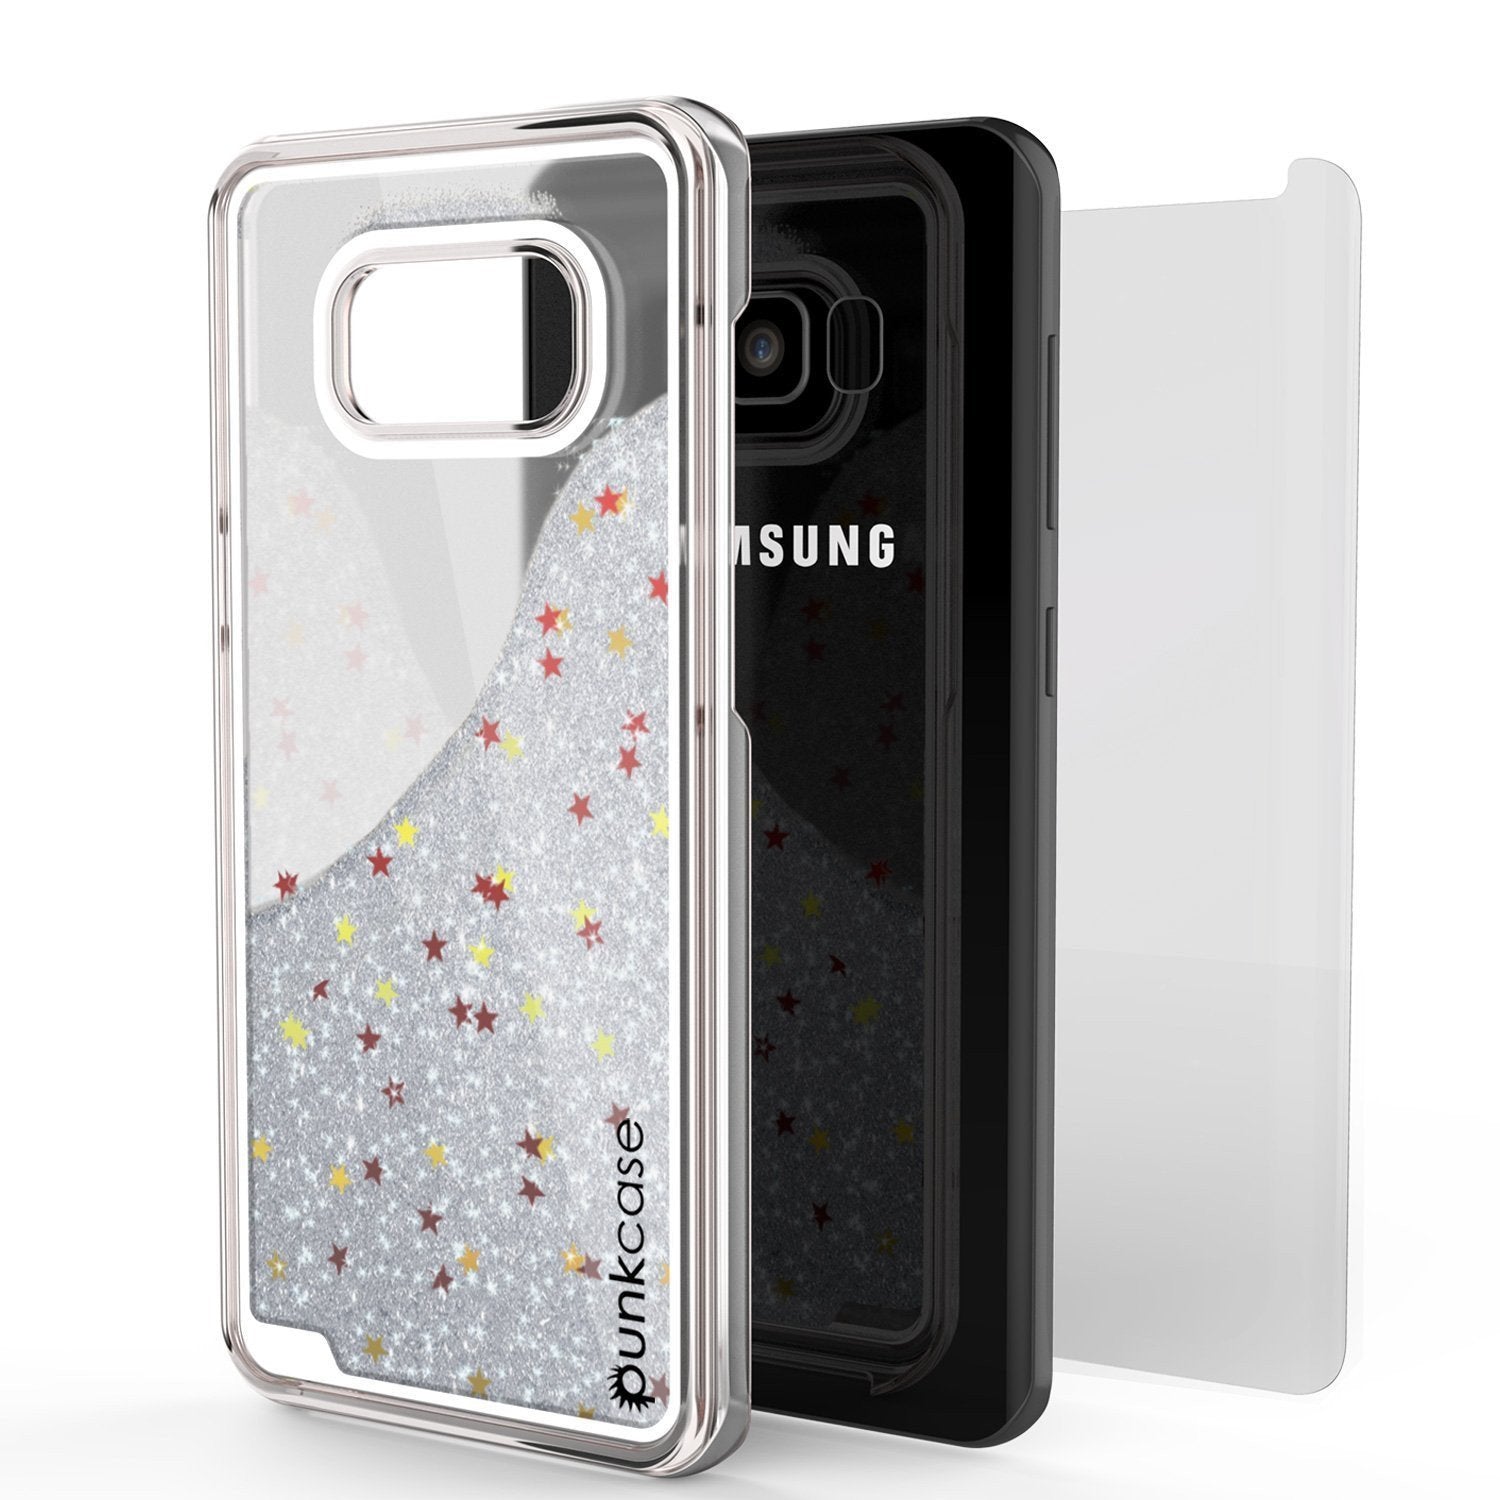 S8 Plus Case, Punkcase [Liquid Series] Protective Dual Layer Floating Glitter Cover with lots of Bling & Sparkle + PunkShield Screen Protector for Samsungs Galaxy S8+ [Silver]